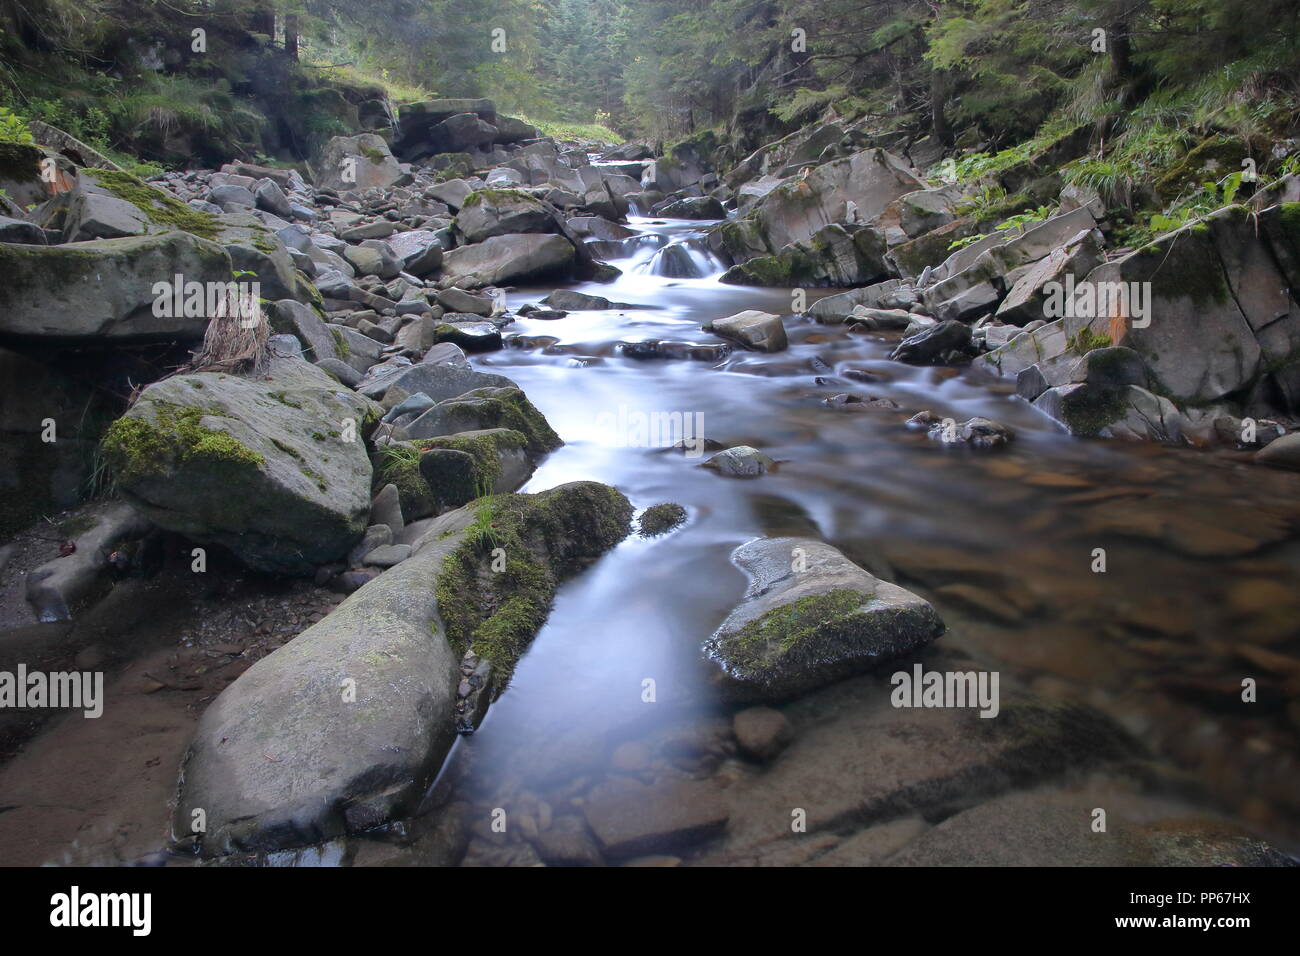 Mountain river with big rokcs and stones on its riverbed, greenery on both river banks, into forest, long time exposure. Stock Photo